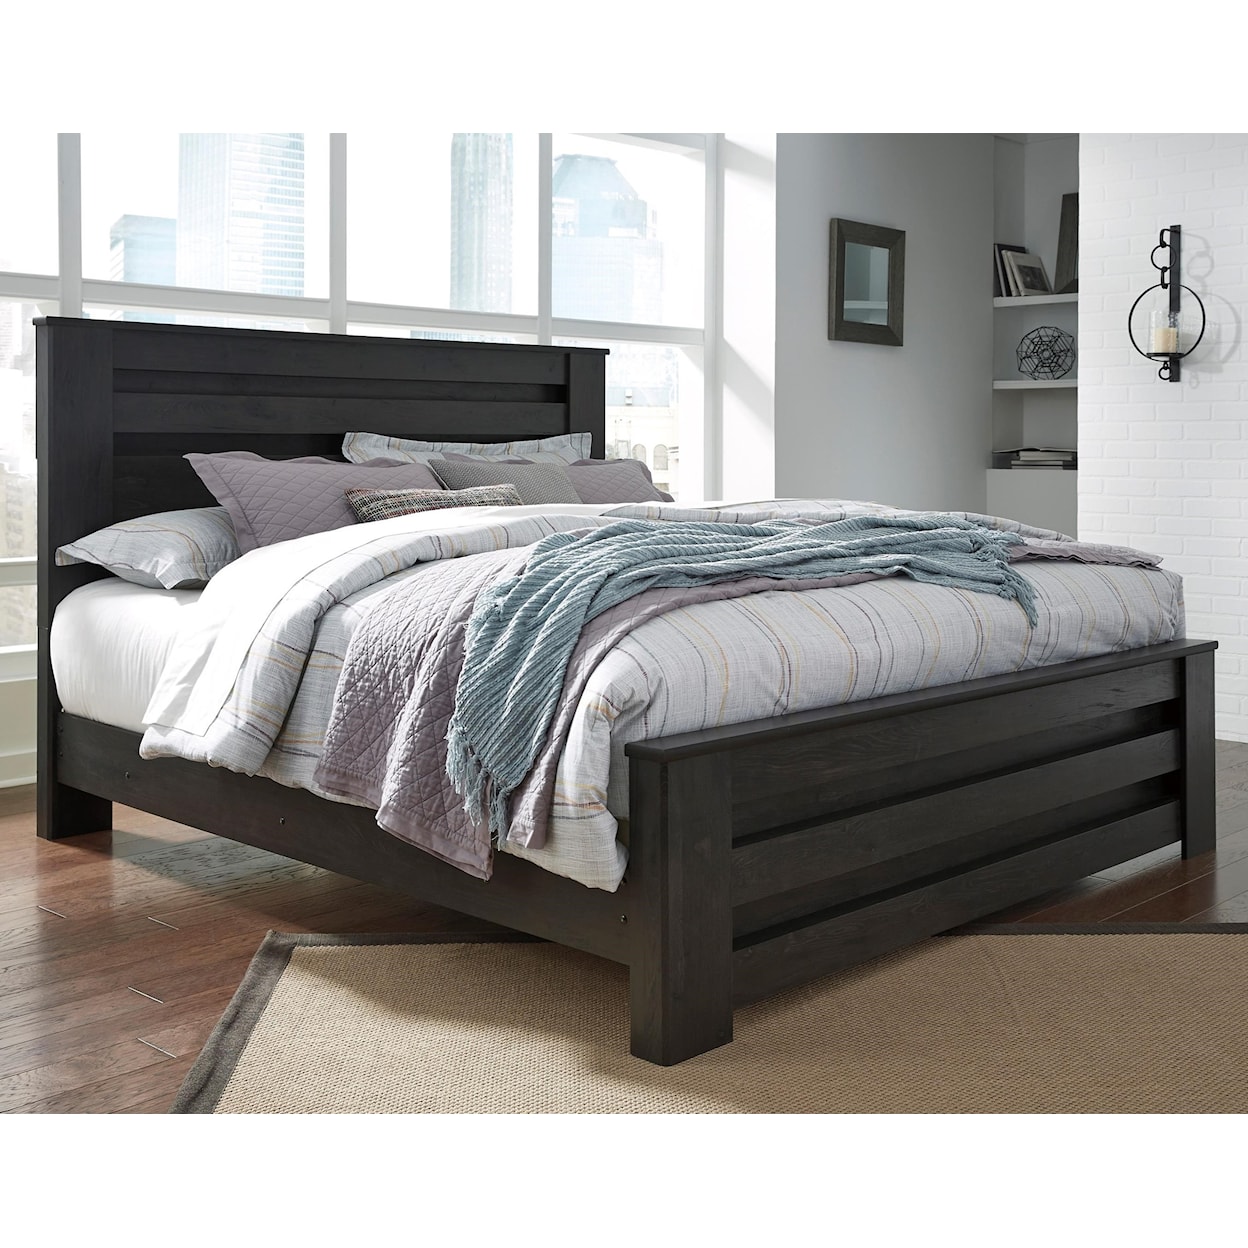 Signature Design by Ashley Furniture Brinxton King Panel Bed